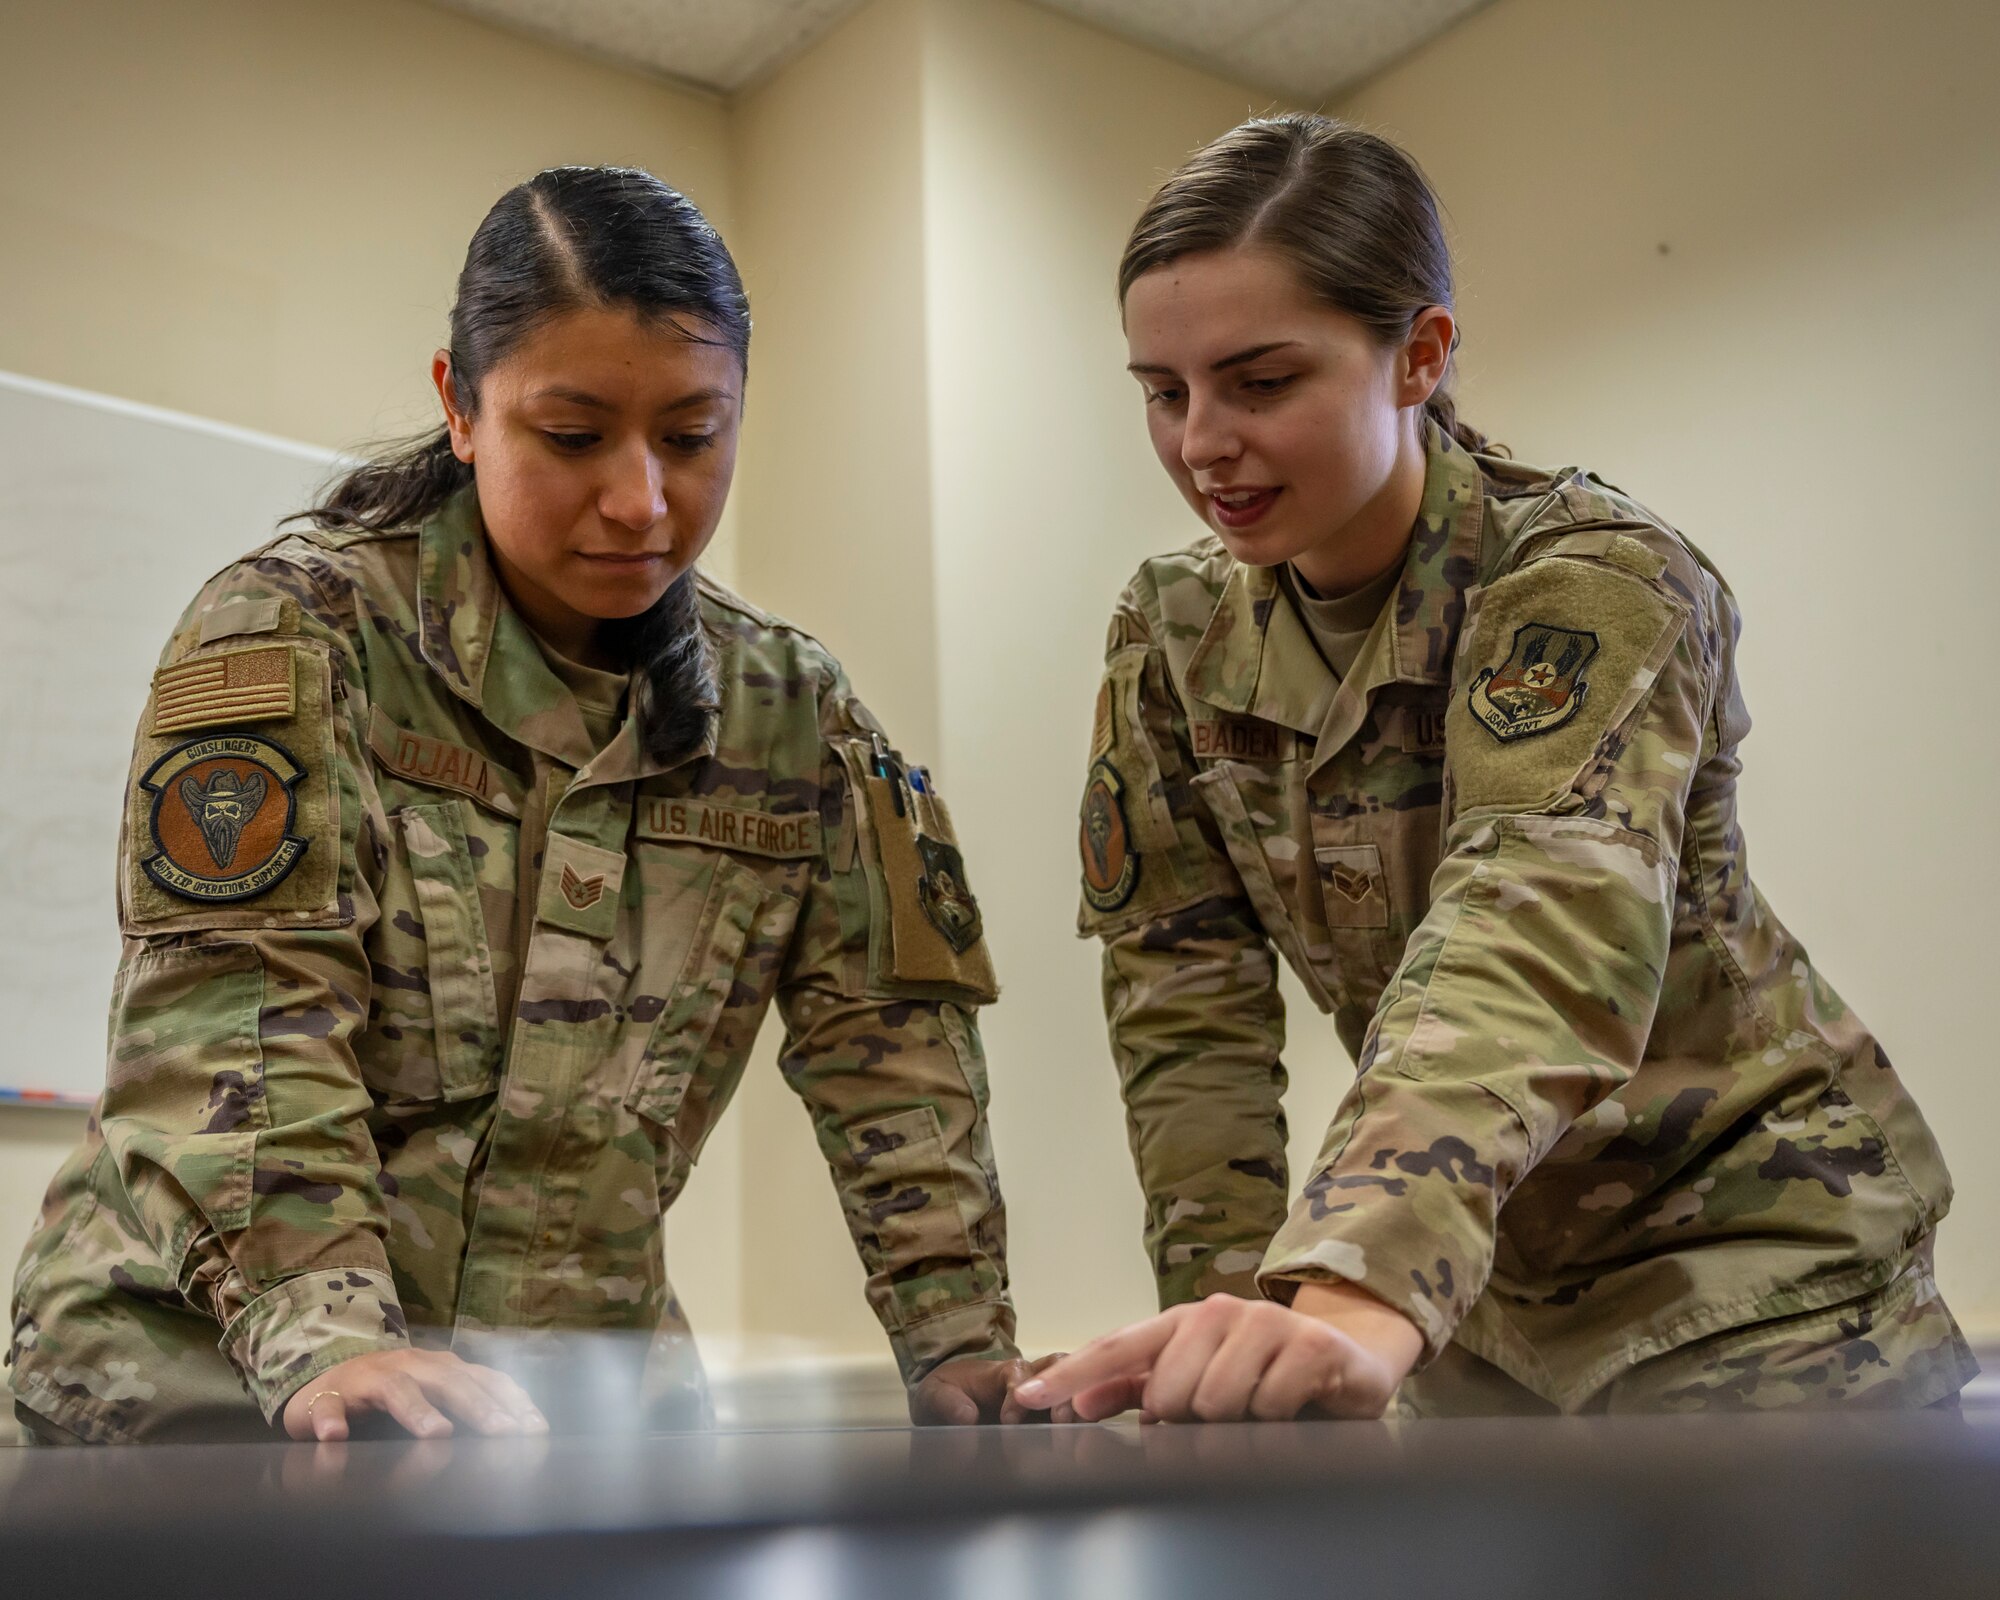 The 407th EOSS Intelligence flight analyzes data on activity around the area of responsibility and ensures commanders are equipped with appropriate knowledge to assess threats in theater.